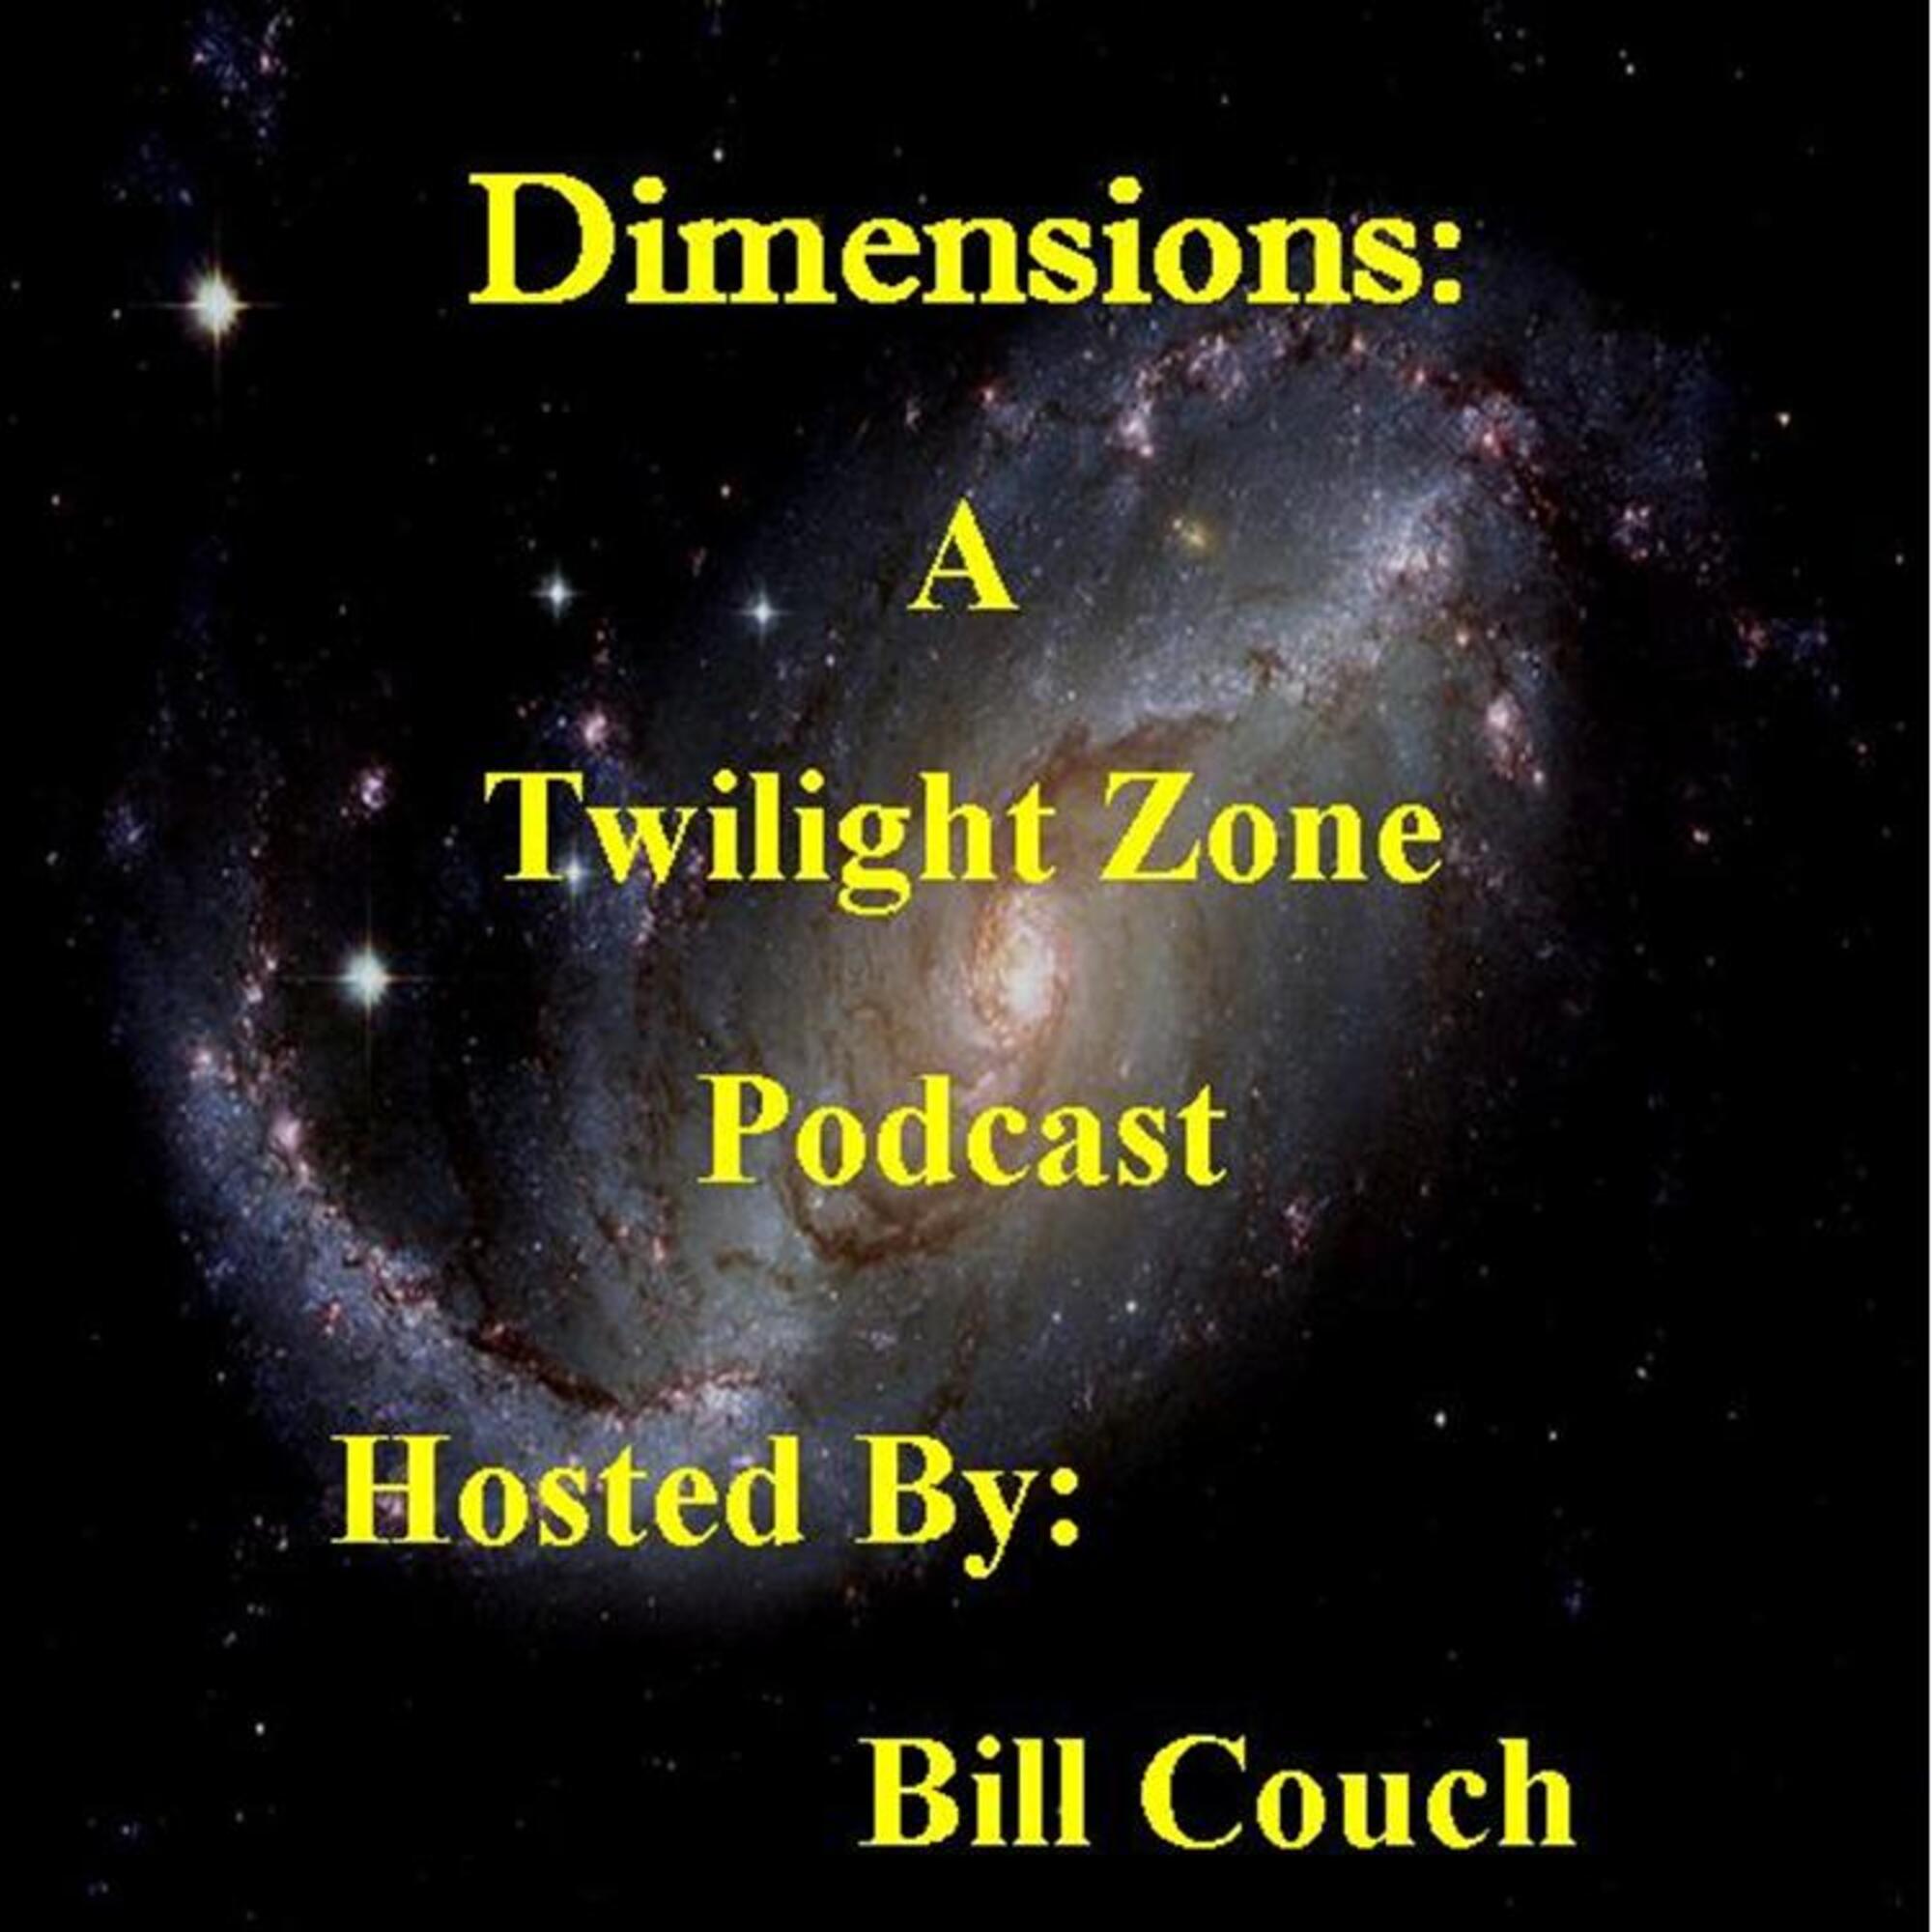 Dimensions: A Twilight Zone Podcast Season 2 Episode 18 "The Odyssey of Flight 33"